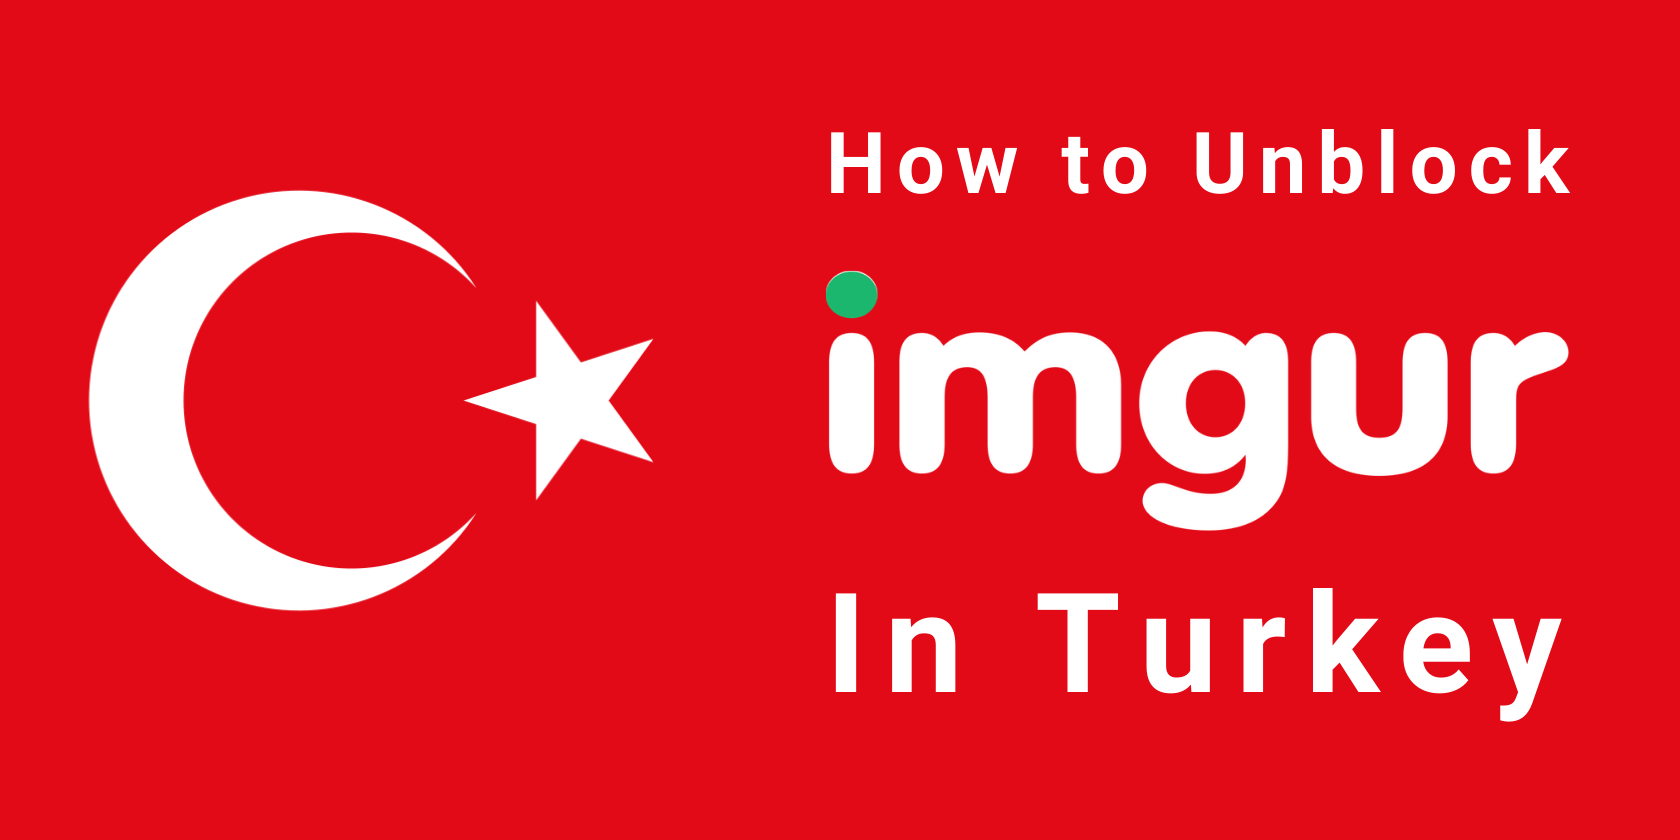 How to Unblock Imgur in Turkey?